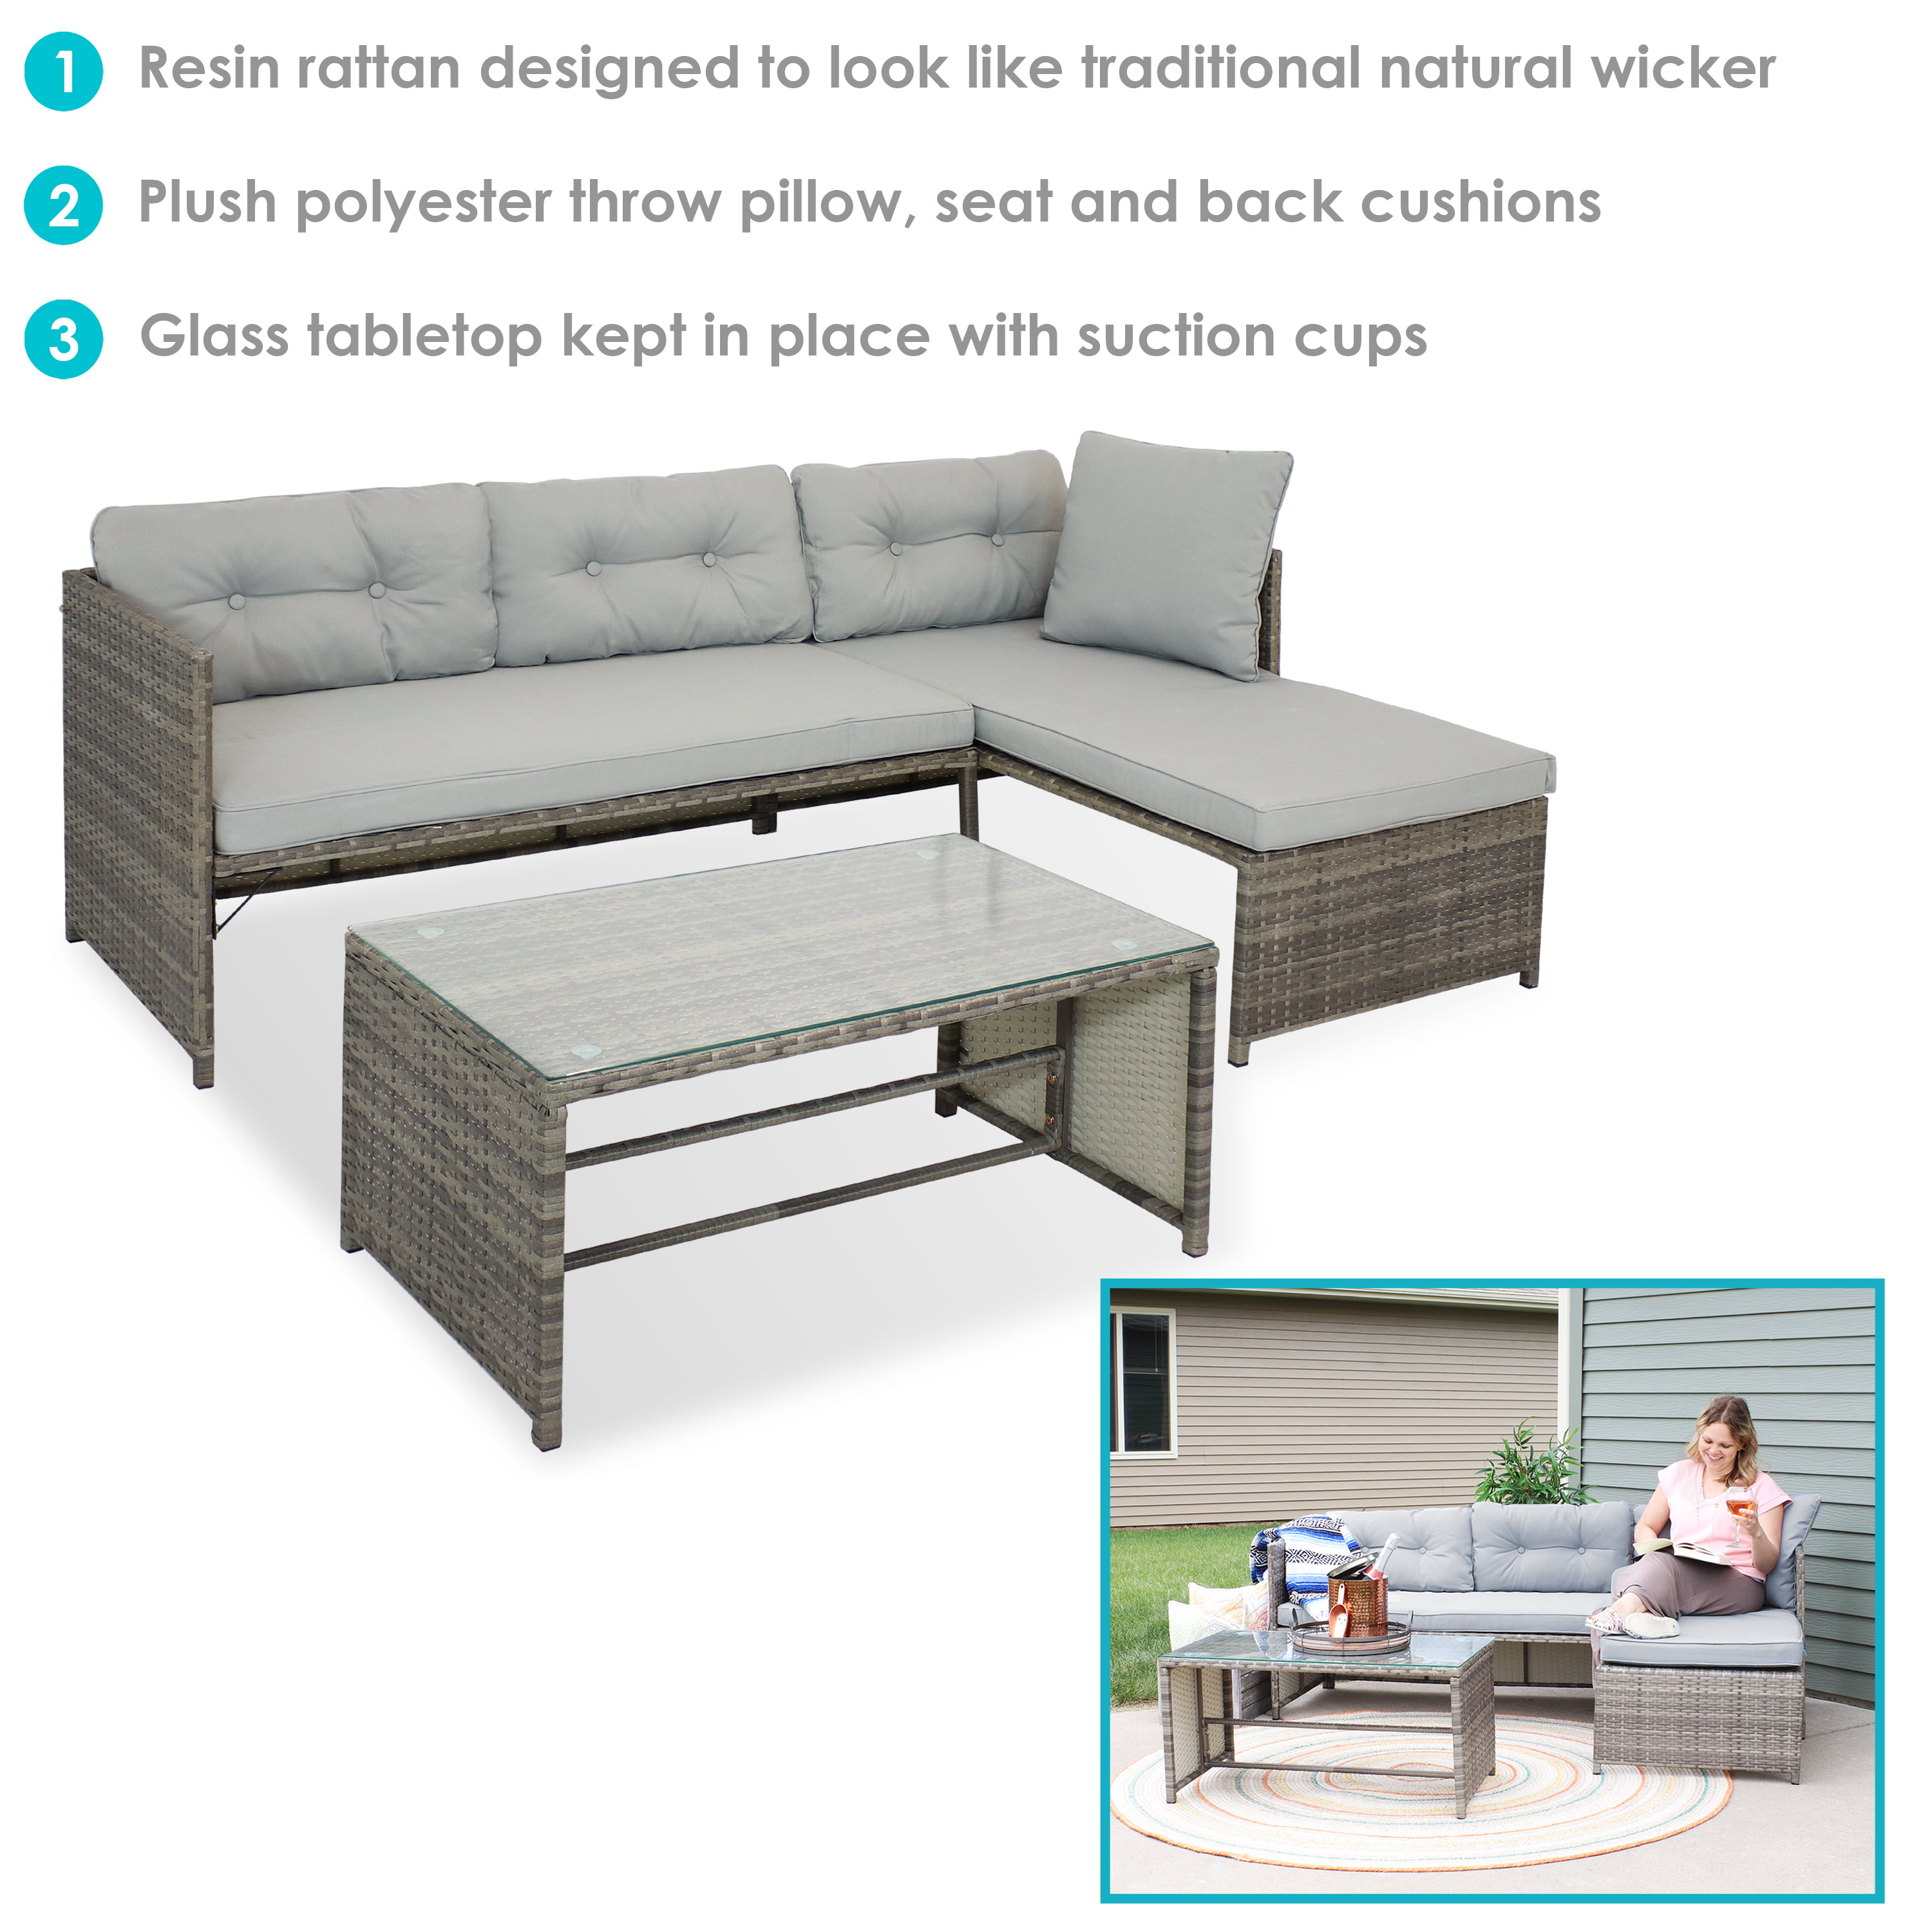 Sunnydaze Outdoor Longford Patio Sectional Sofa Conversation Set with Cushions and Table - Stone Gray - 3pc - image 4 of 11